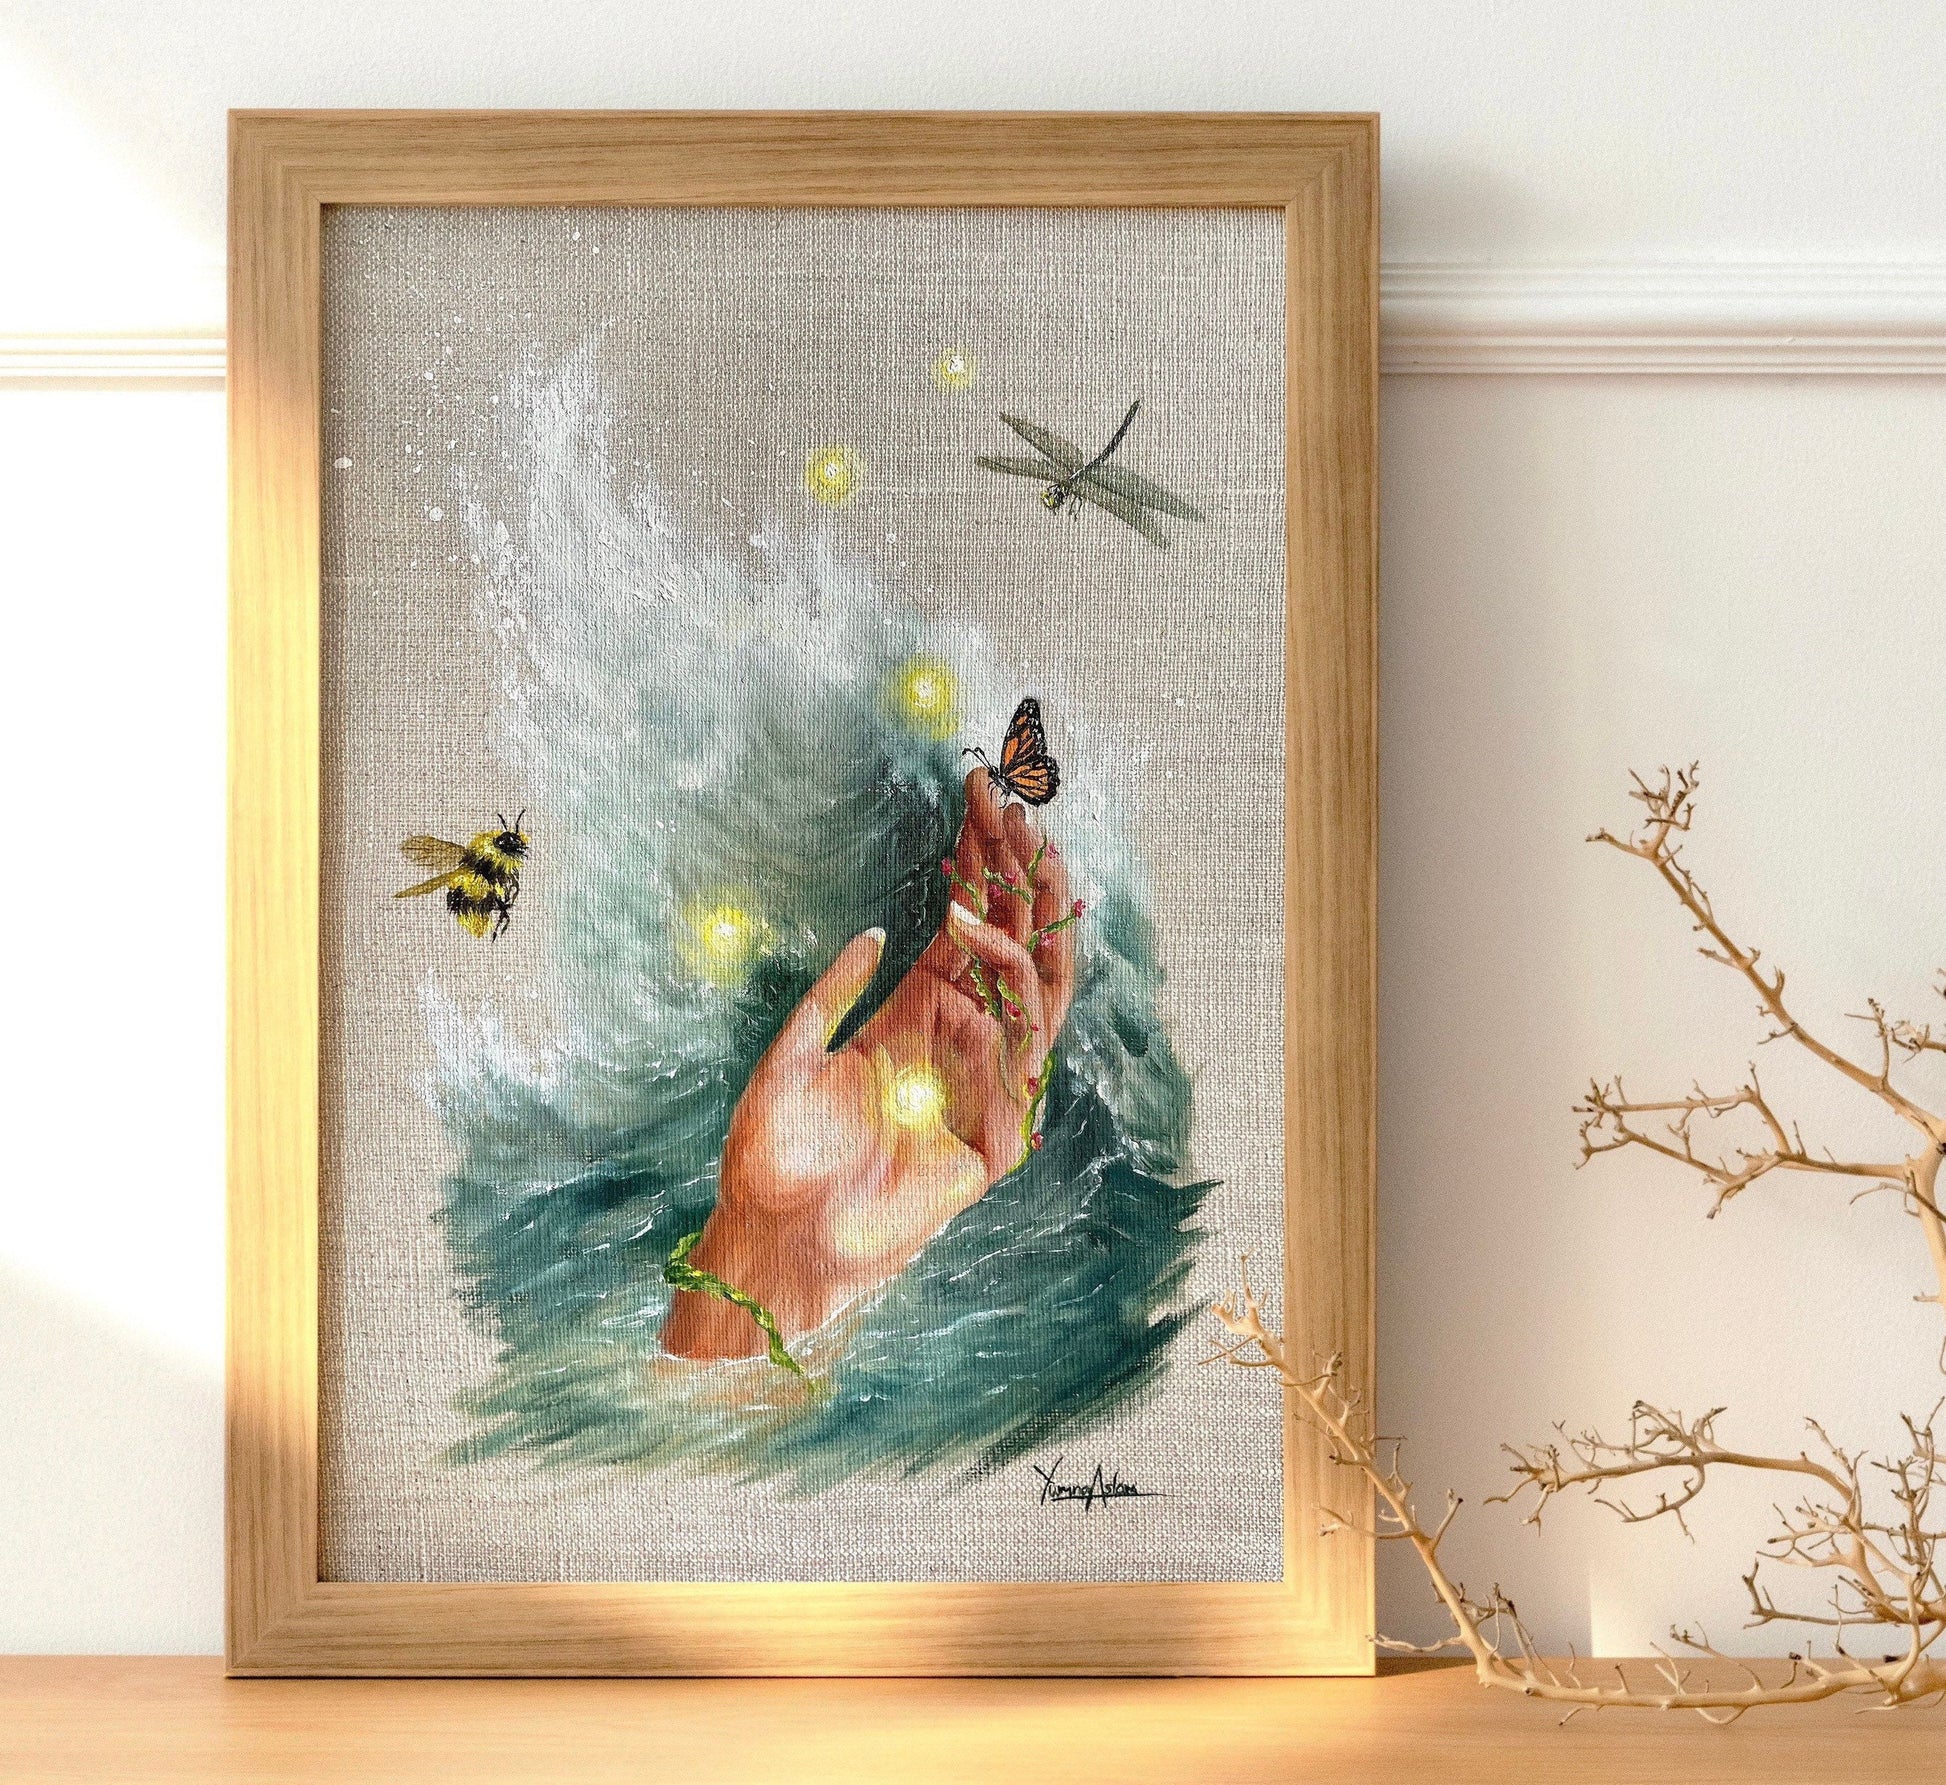 The miracle - Fine Art Print with certificate of authenticity (unframed), ocean print, wall art, home decor, sea, waves print, magical art